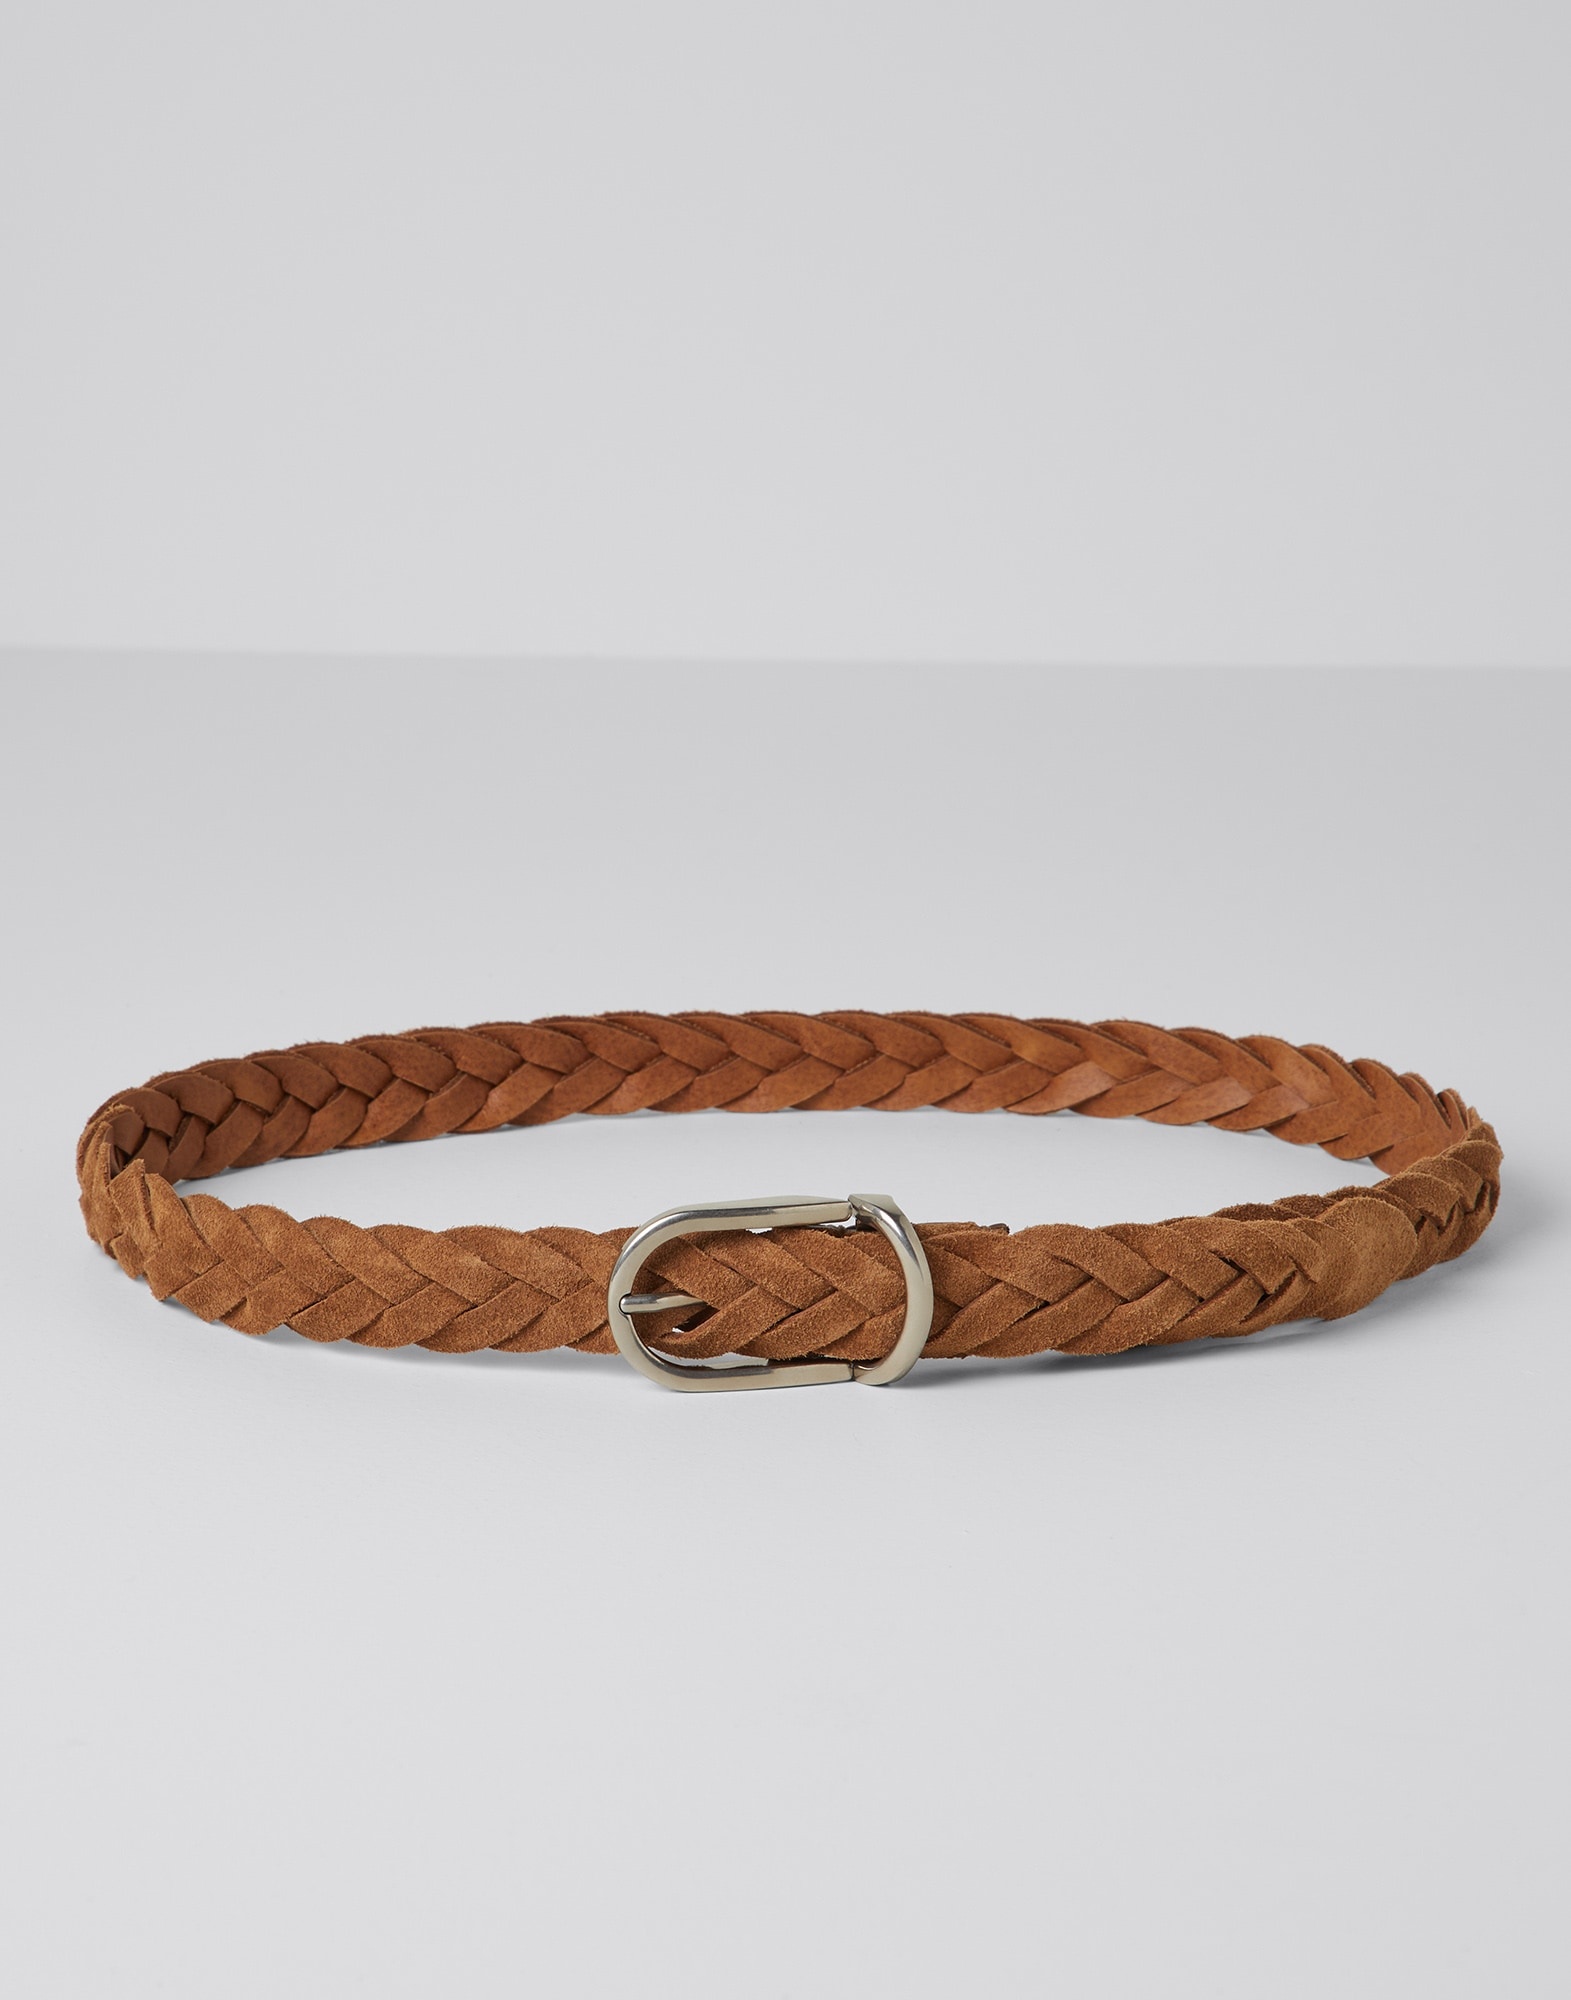 Bull suede braided belt with rounded buckle and metal keeper - 1